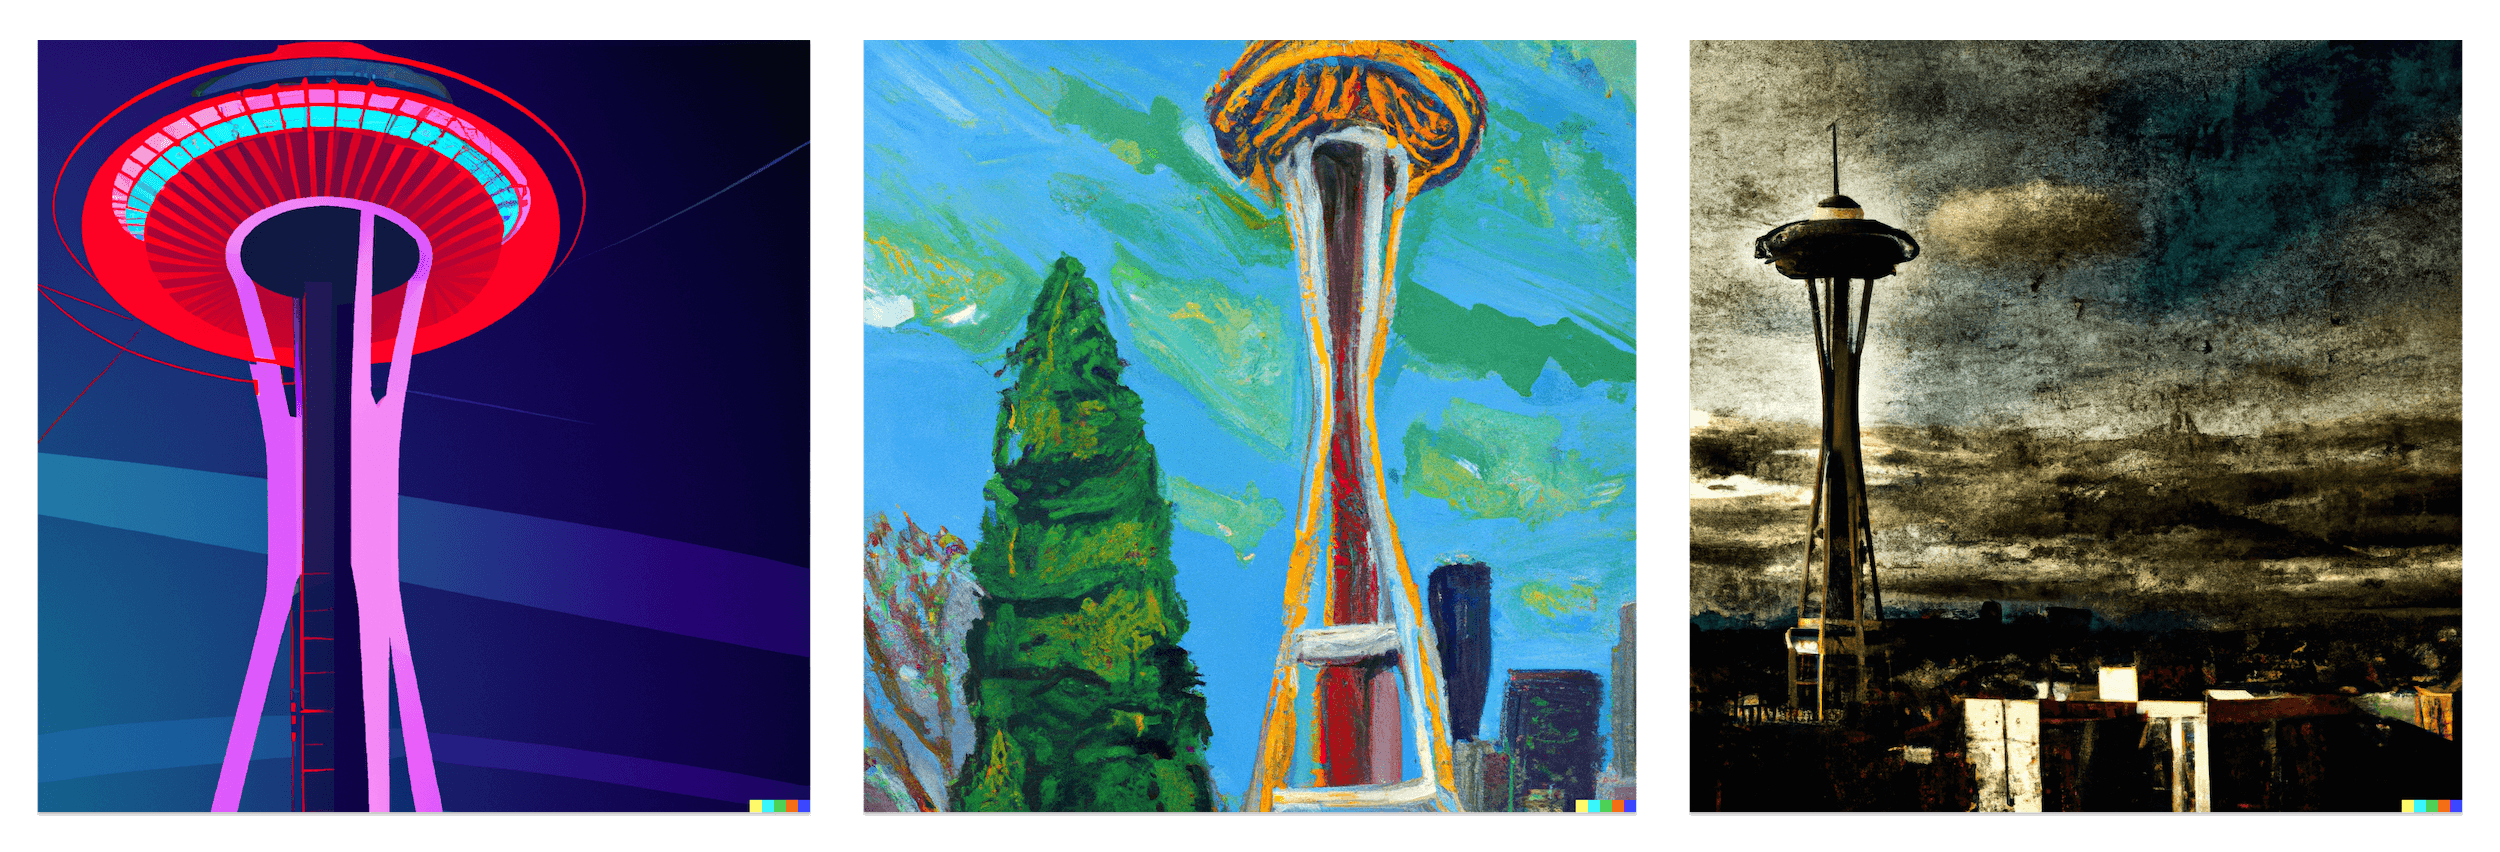 Three photos of the Seattle Space Needle from varying perspectives, all in different art styles